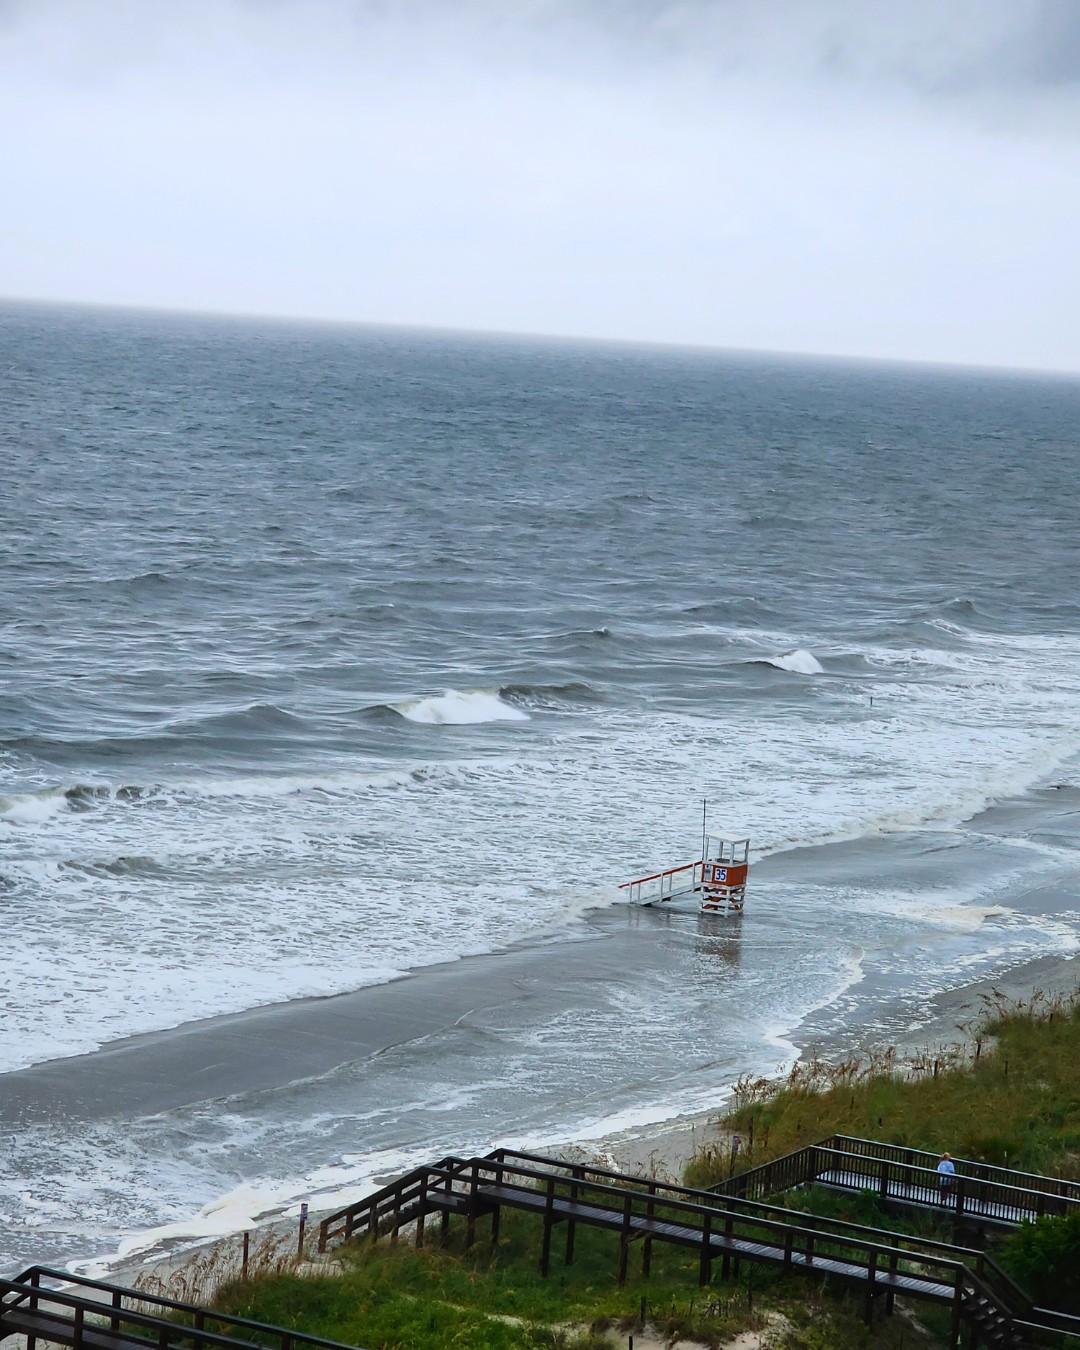 Is a hurricane on Myrtle Beach, SC ruining your vacation plans? Be sure to plan for a safe visit with these tips. Learn about evacuation plans, alerts, and tourist advice for a memorable trip.